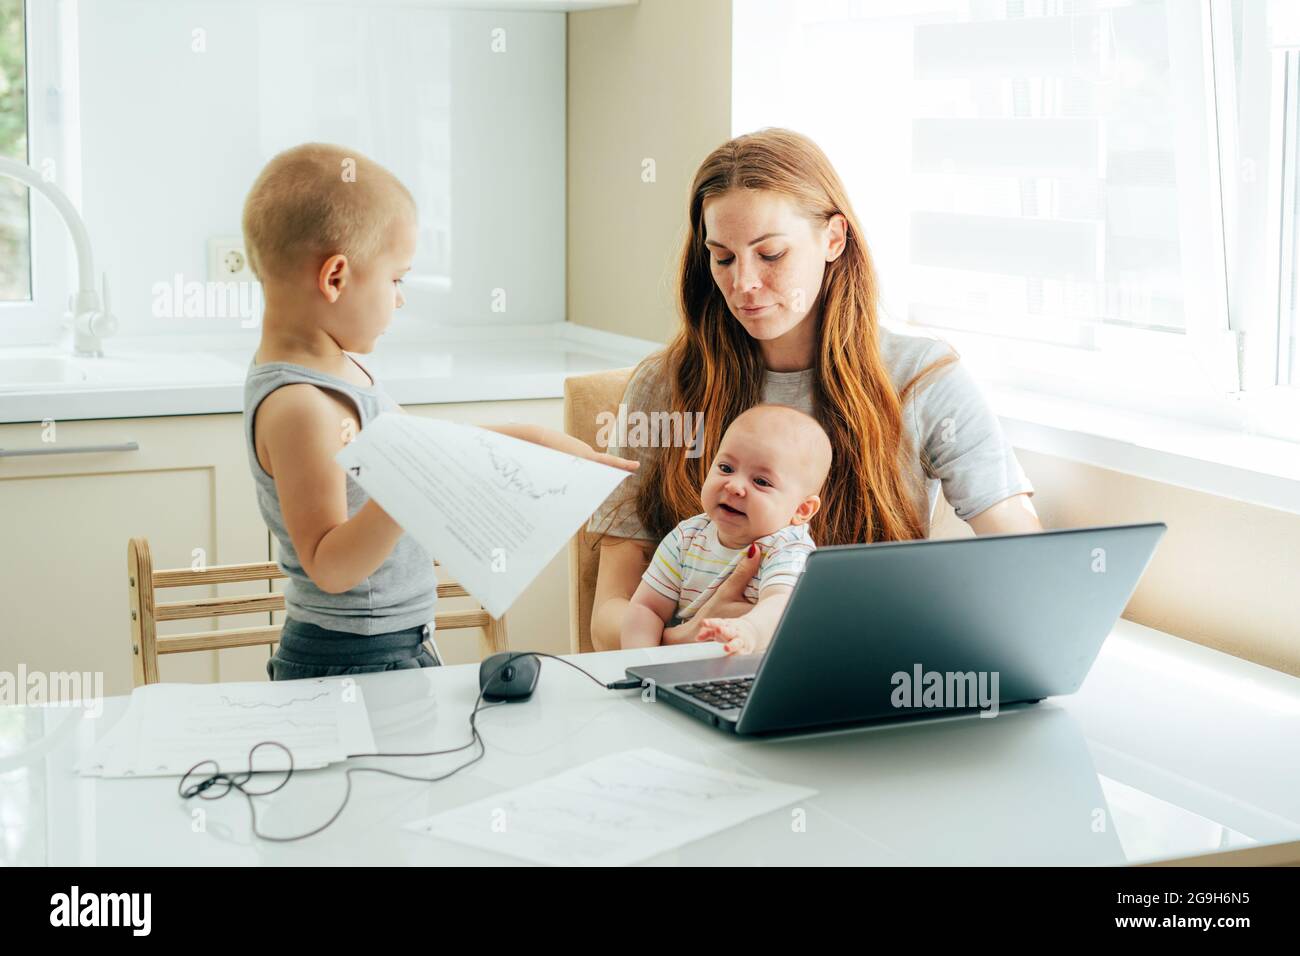 Young attractive mother with two children sitting at the table in the kitchen at home and works on a laptop while taking care of the children. Stock Photo